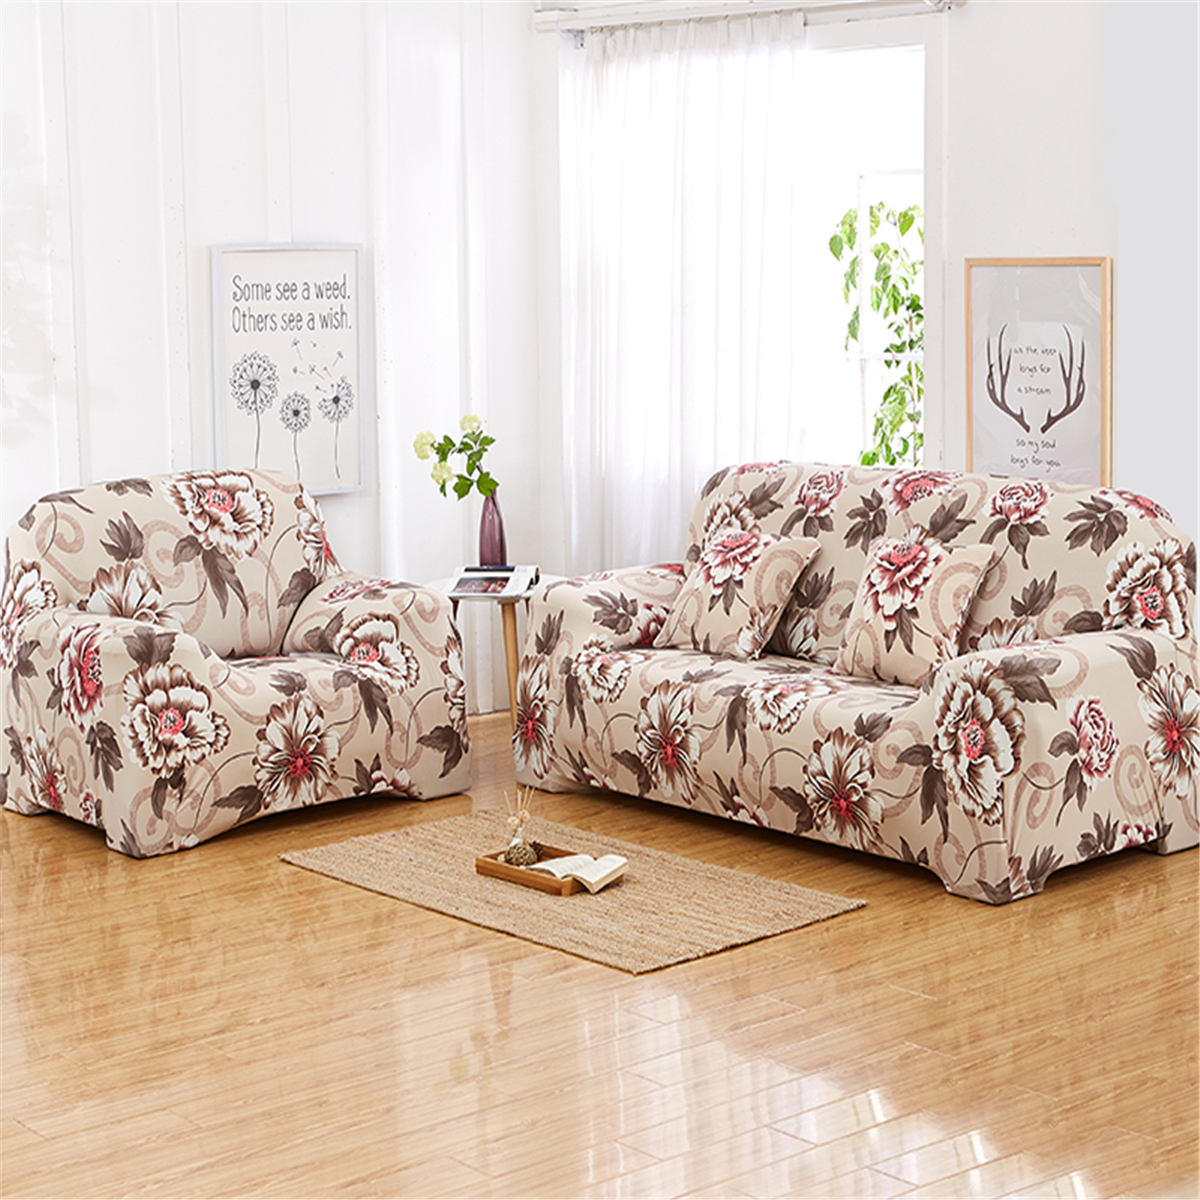 Details about   Fashion Home Decor Floral Sofa Bed Cover Stretch Slipcover Couch Cover Dirtproof 